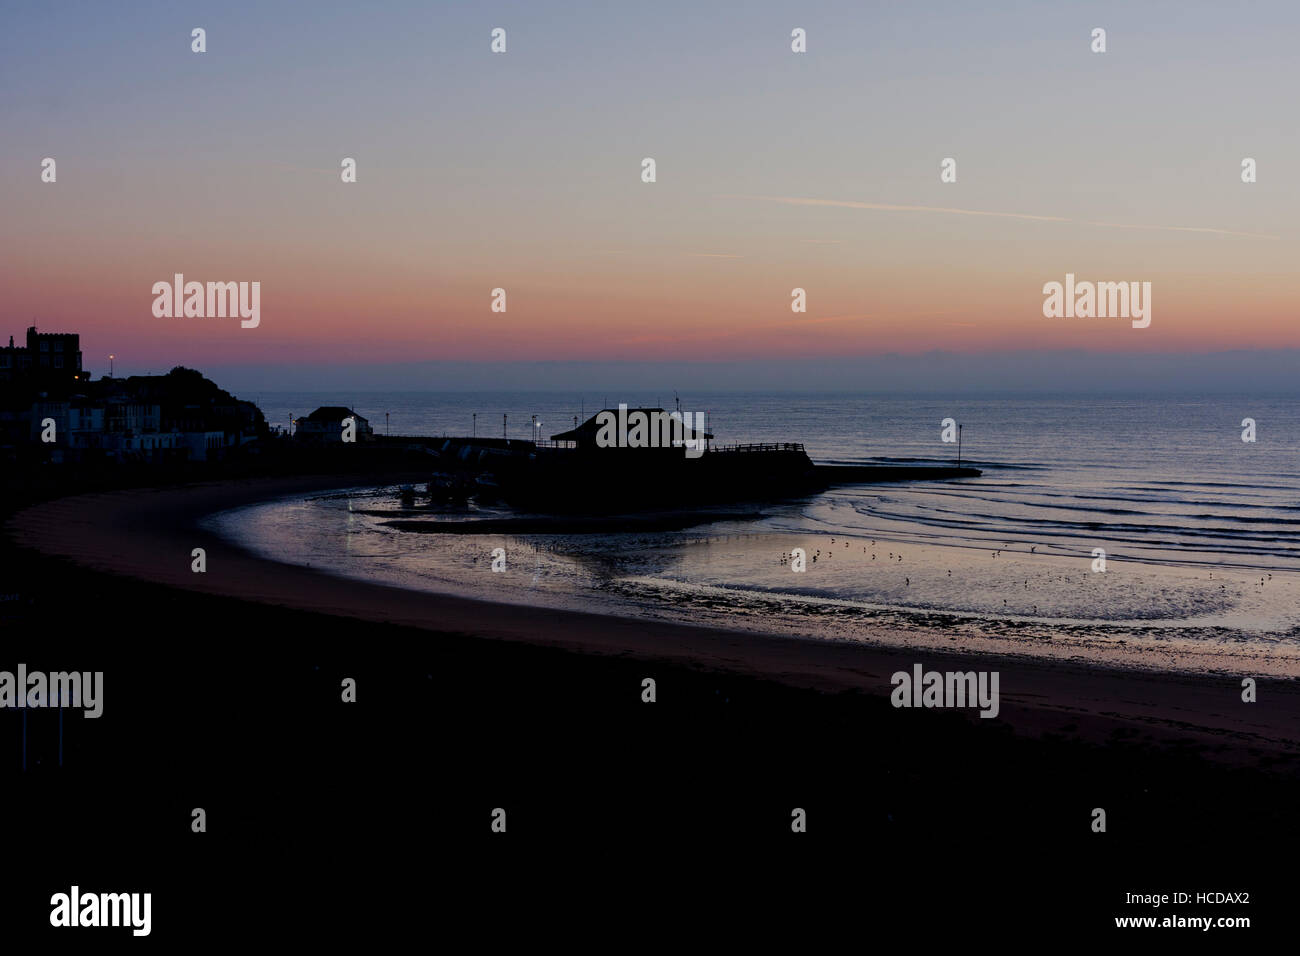 Dawn sky breaking over the sea at Broadstairs with the harbour and beach in the foreground. Clear sky with cloud layer on horizon. Calm sea. Stock Photo